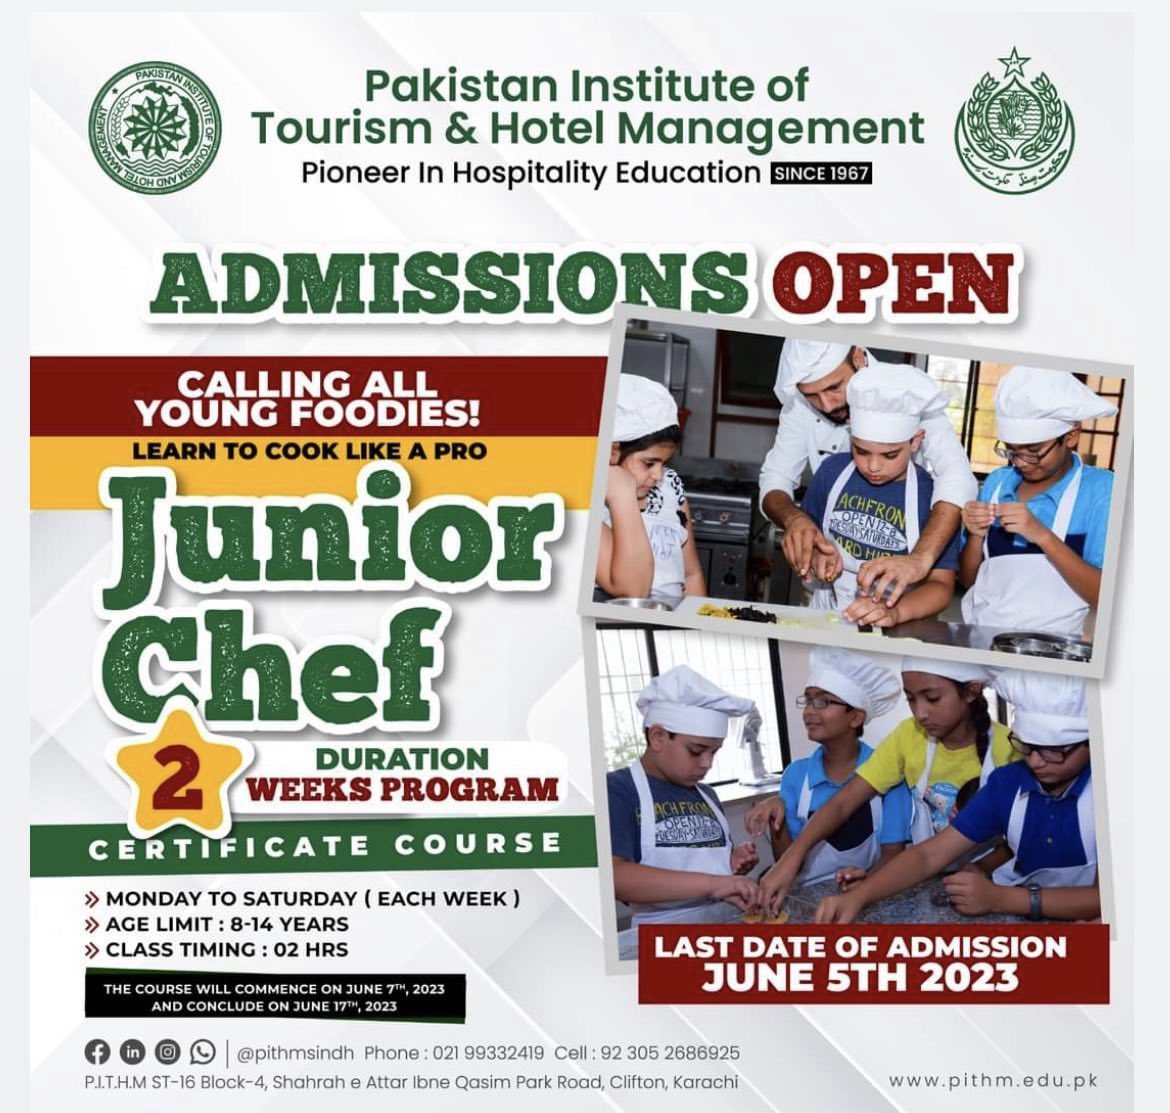 📢🍽️ Admission Open! Calling all young foodies to learn to cook like a pro! 🎉 Join @OfficialPithm Junior Chef 2-week program and earn a certificate. 🏅Don’t miss this opportunity to enhance your culinary skills! Register now! #JuniorChef #CookingClass #CertificateCourse